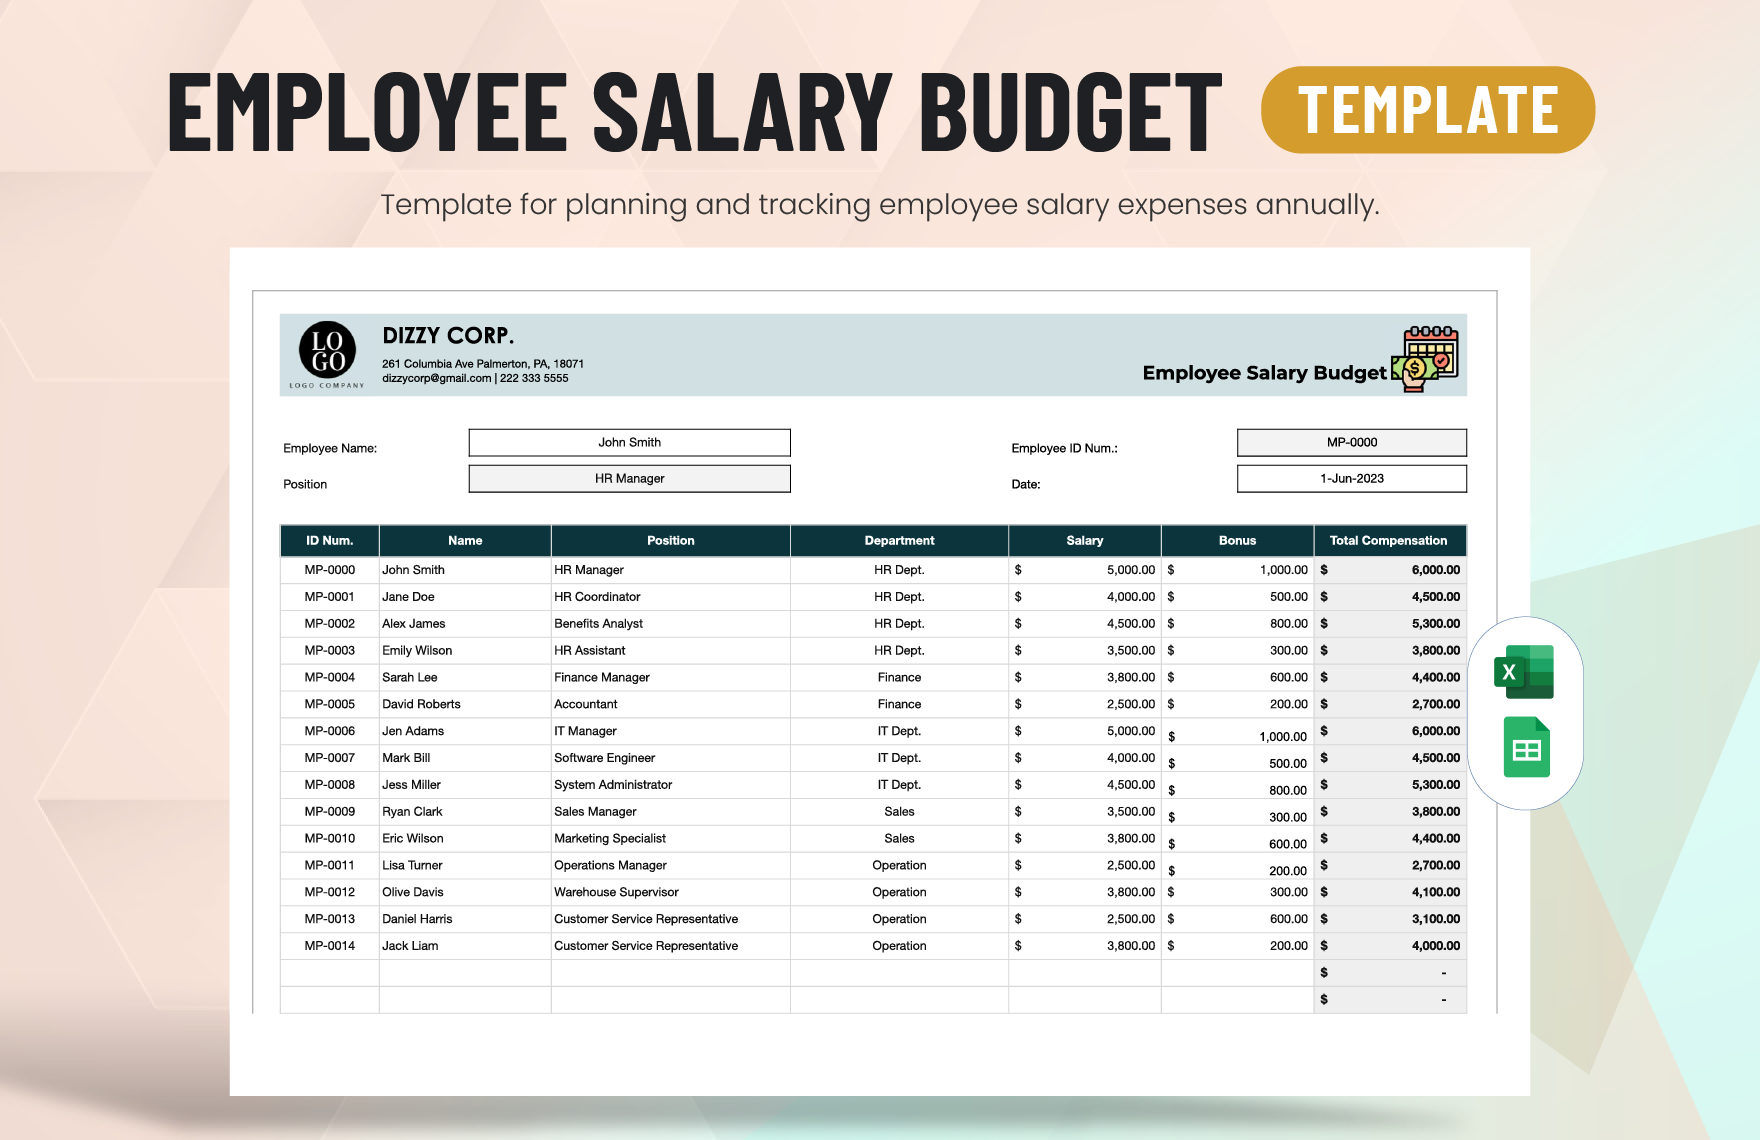 Employee Salary Budget Template in Excel, Google Sheets